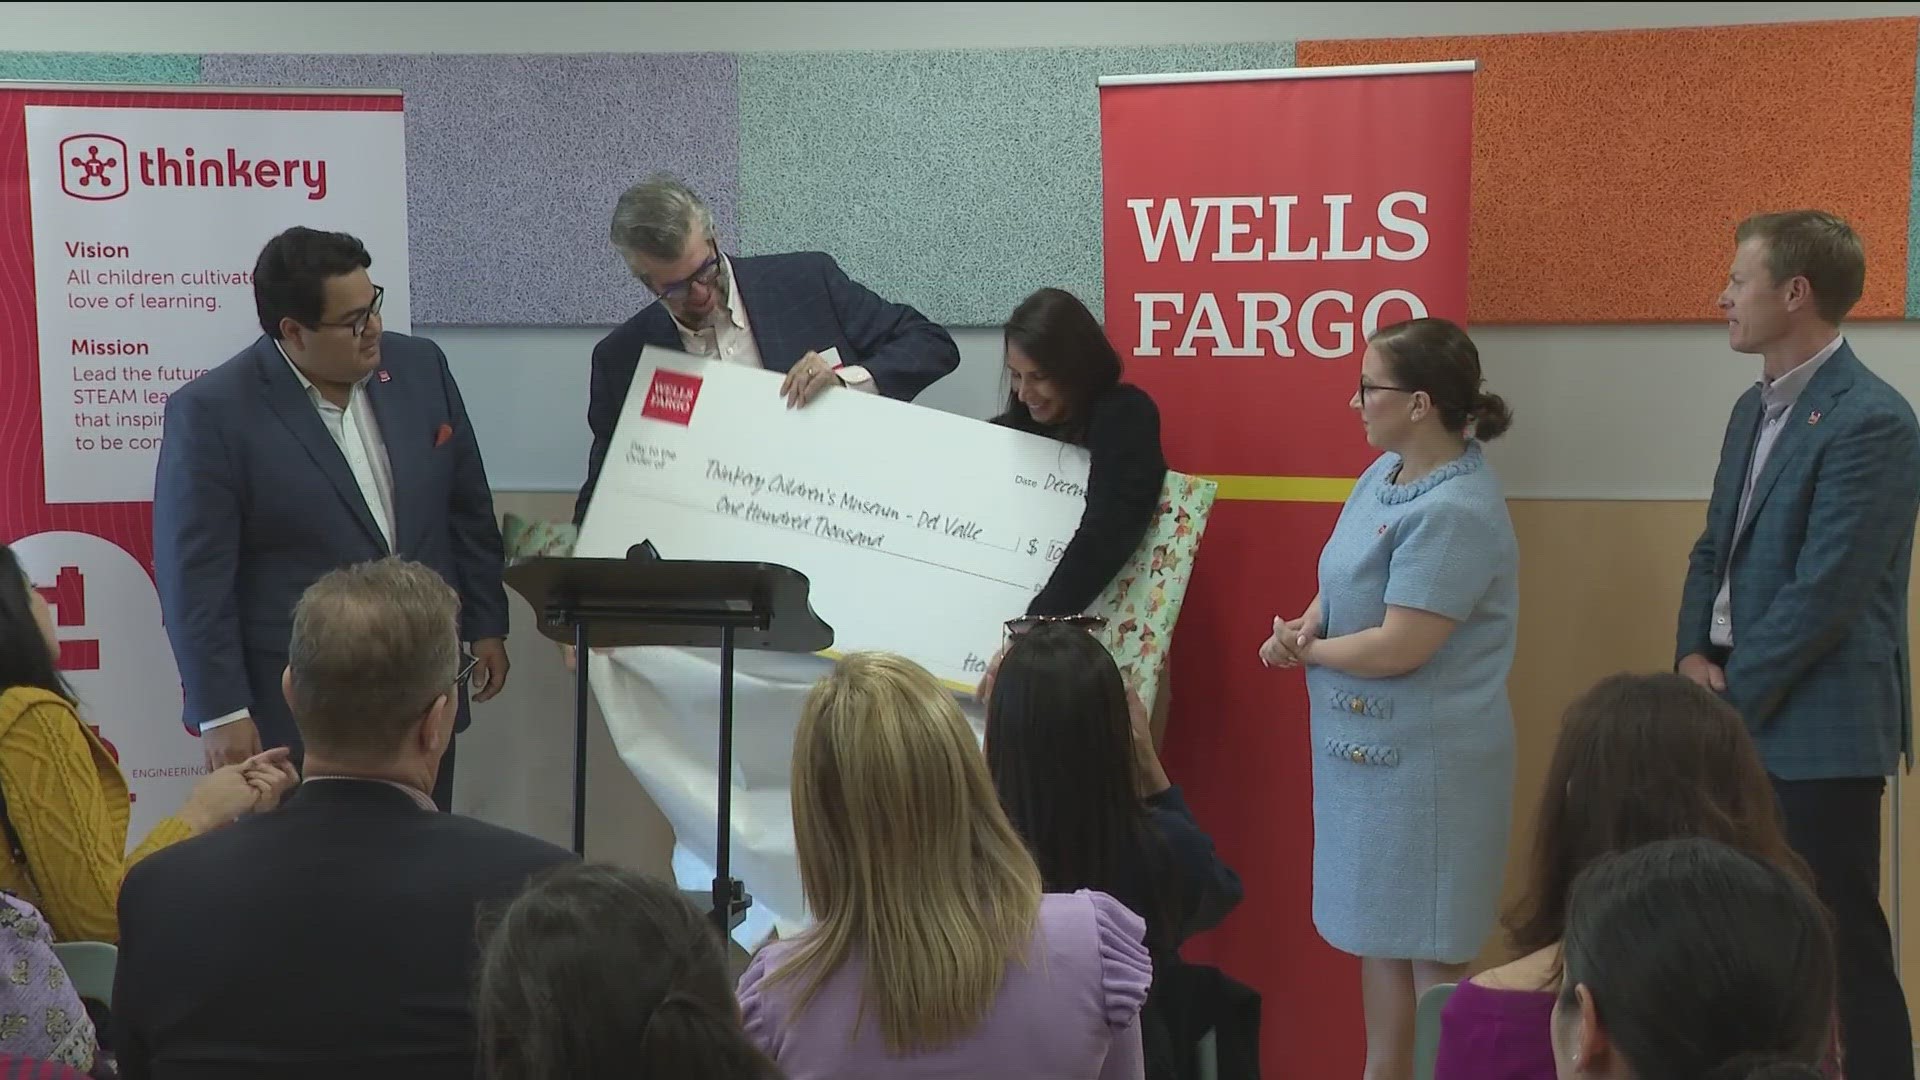 A $100,000 check from Wells Fargo was presented to help create a new museum in the Austin area.